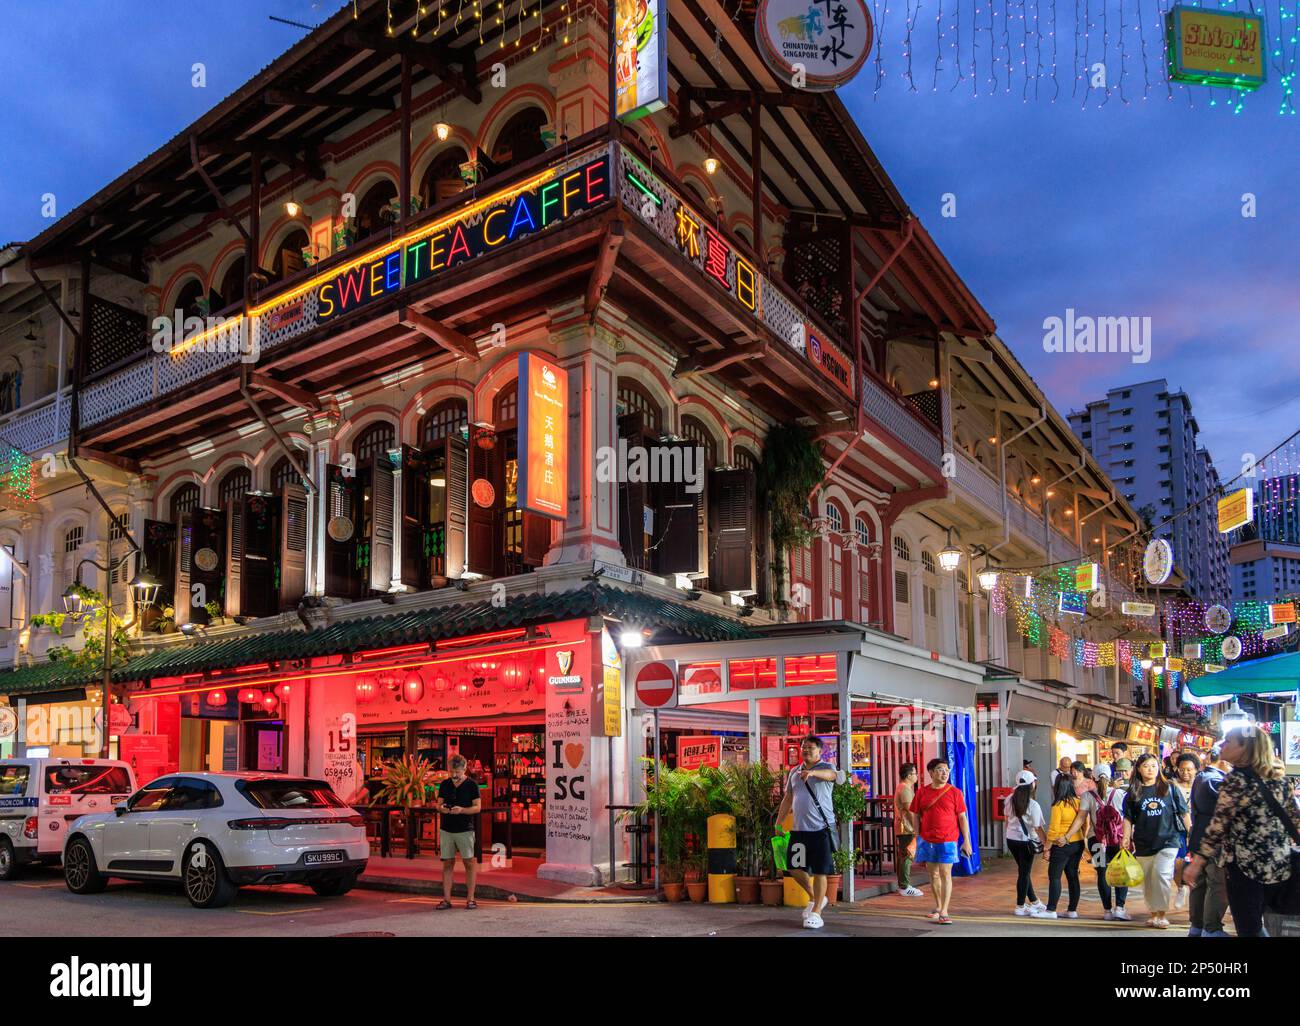 Sweettea Caffe and bar on the corner of Trengganu Street and Temple Street, Chinatown, Singapore Stock Photo